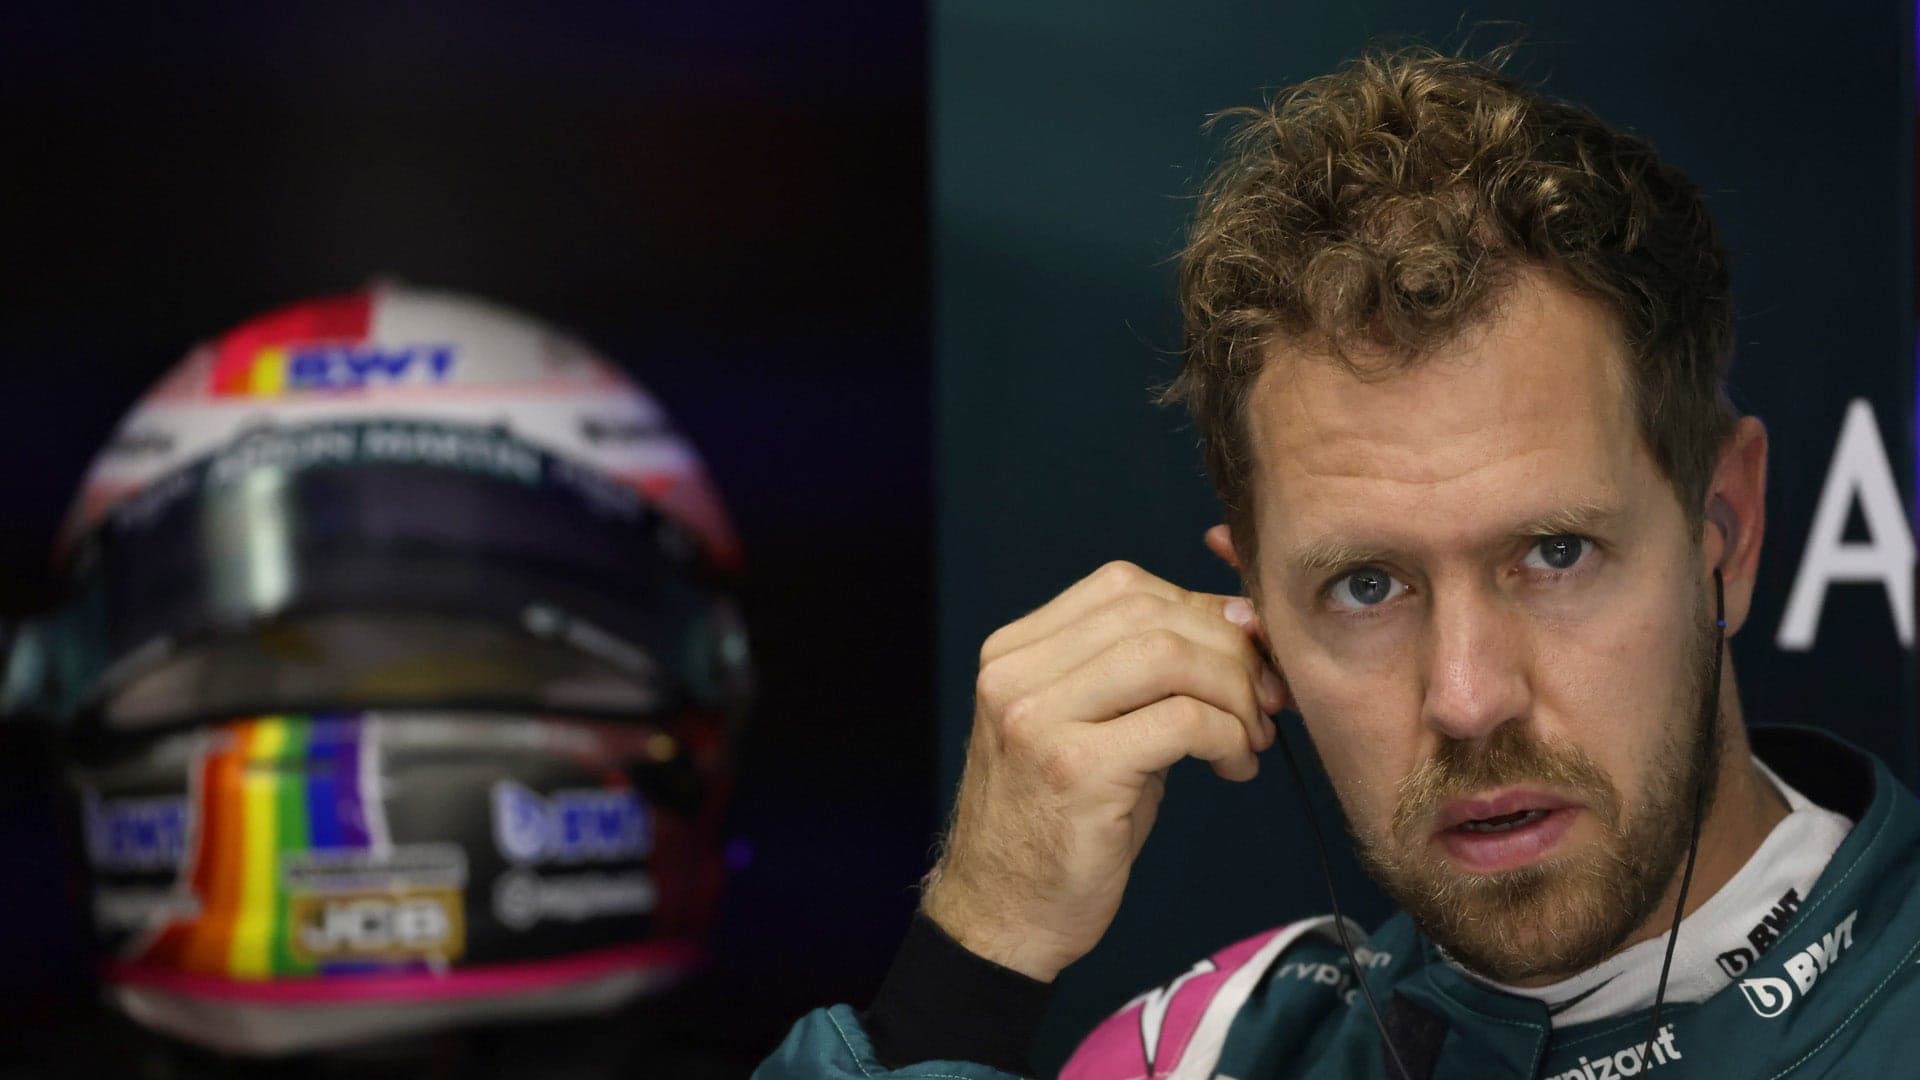 Sebastian Vettel Is Still Disqualified From the Hungarian Grand Prix